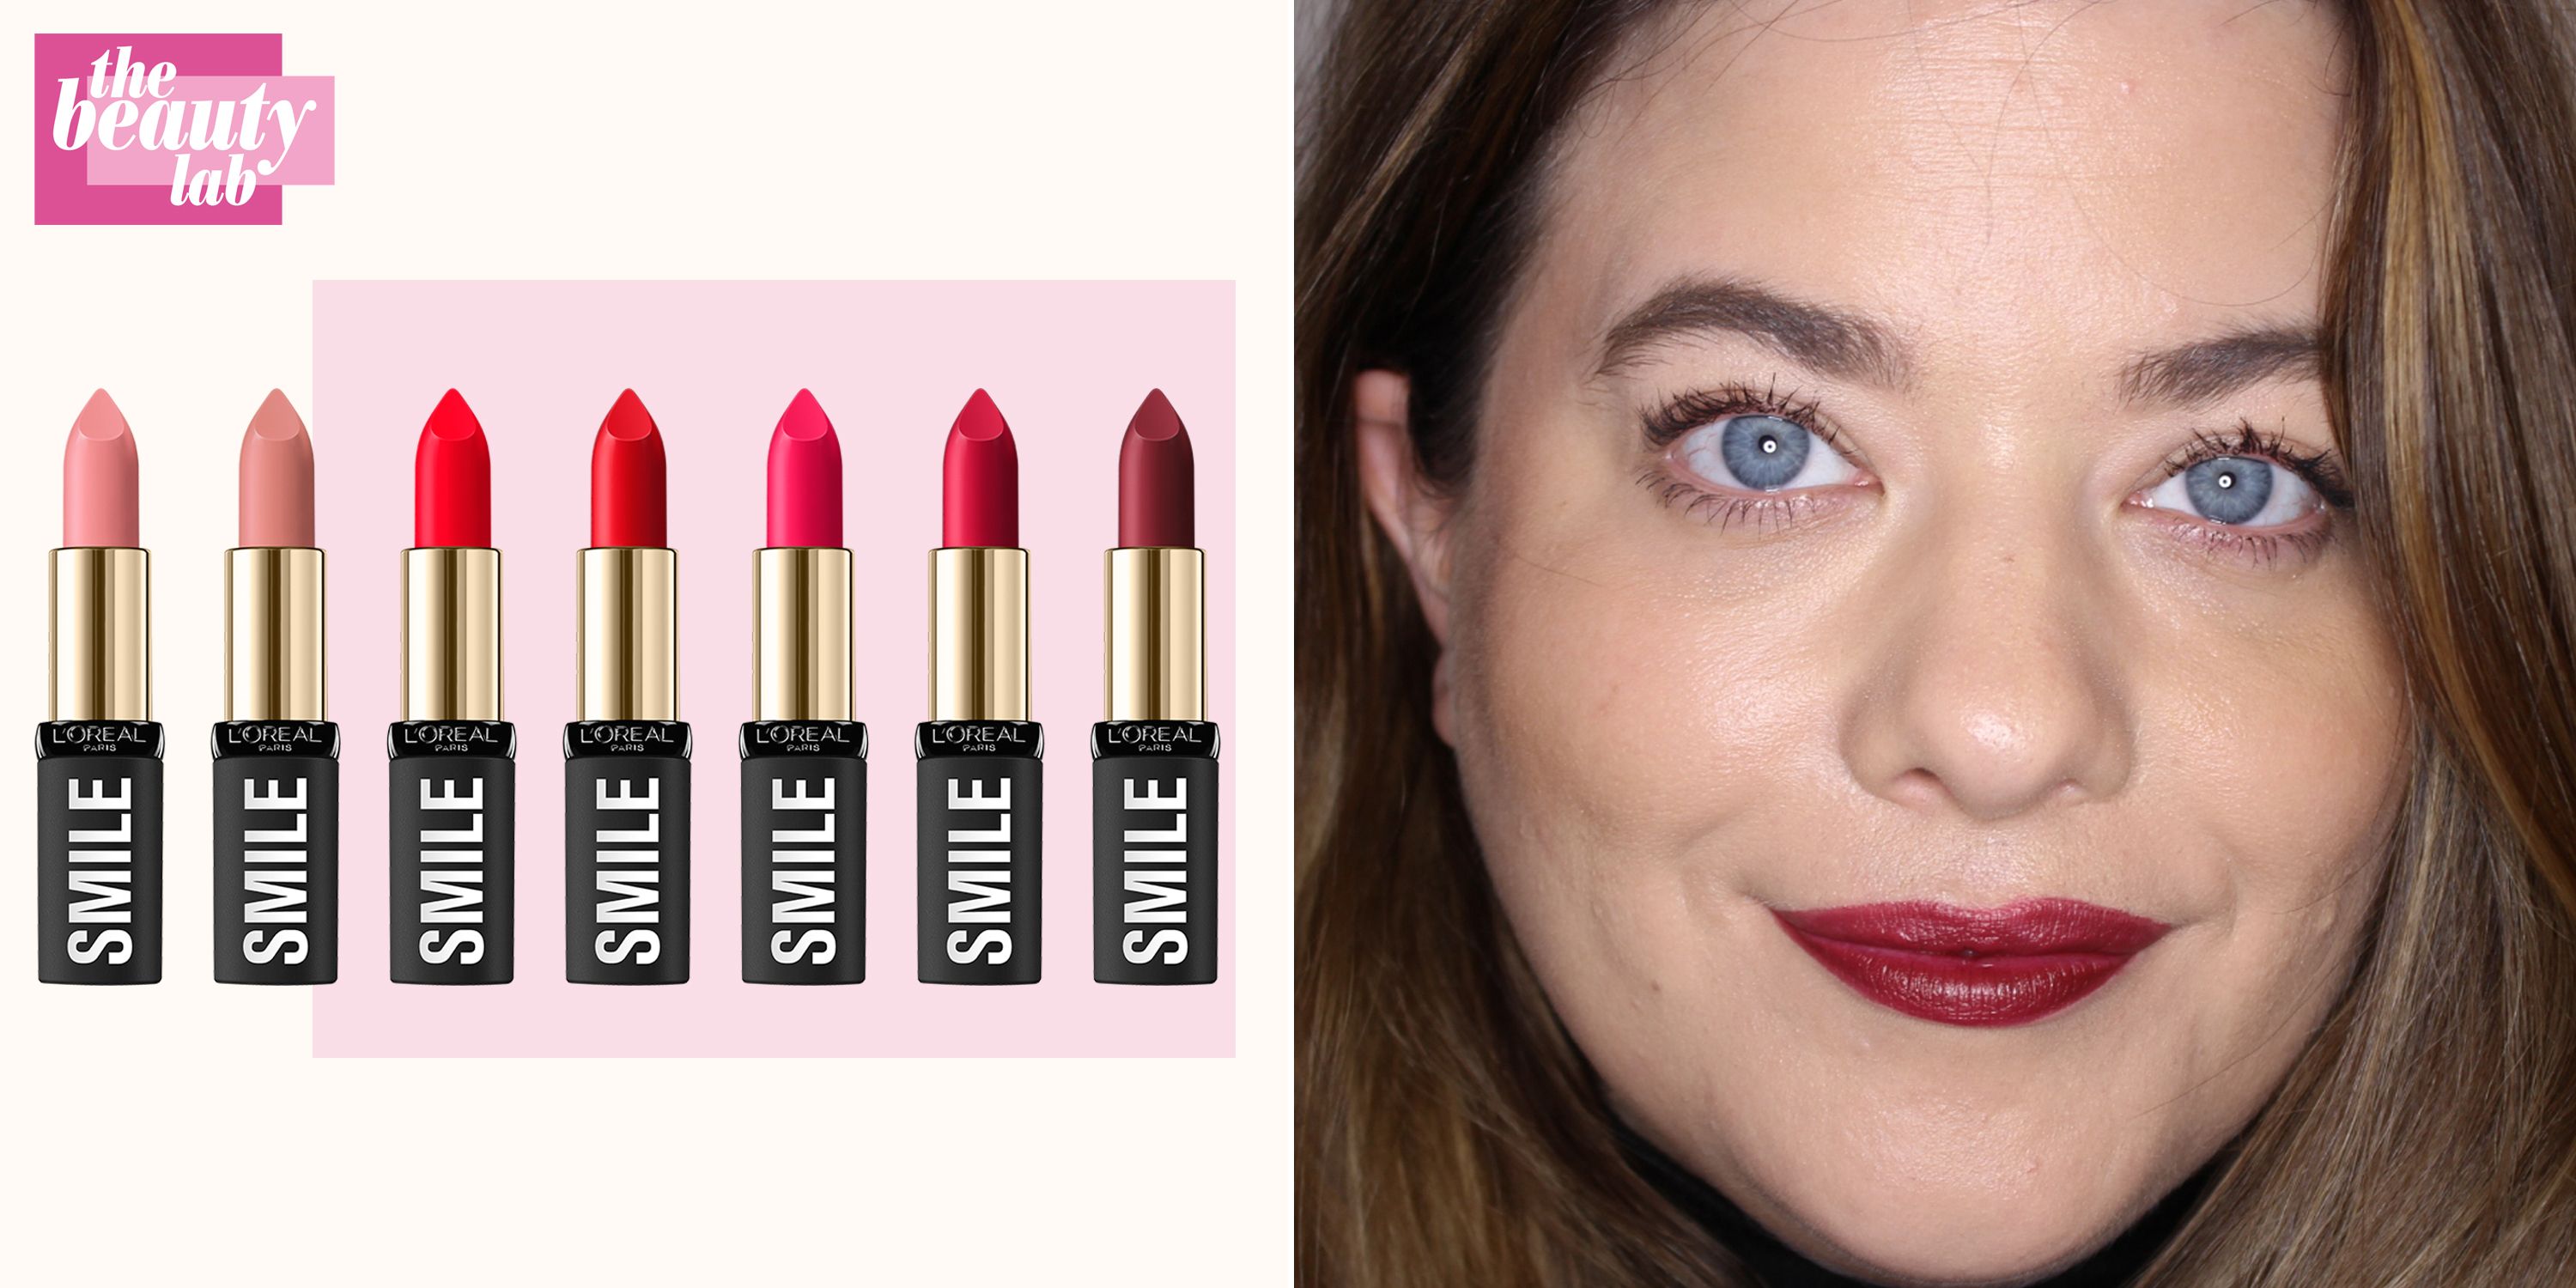 Moderat Sørge over modnes L'Oréal Paris Isabel Marant Makeup Collection - See Every Lipstick Shade  From Nude to Burgundy